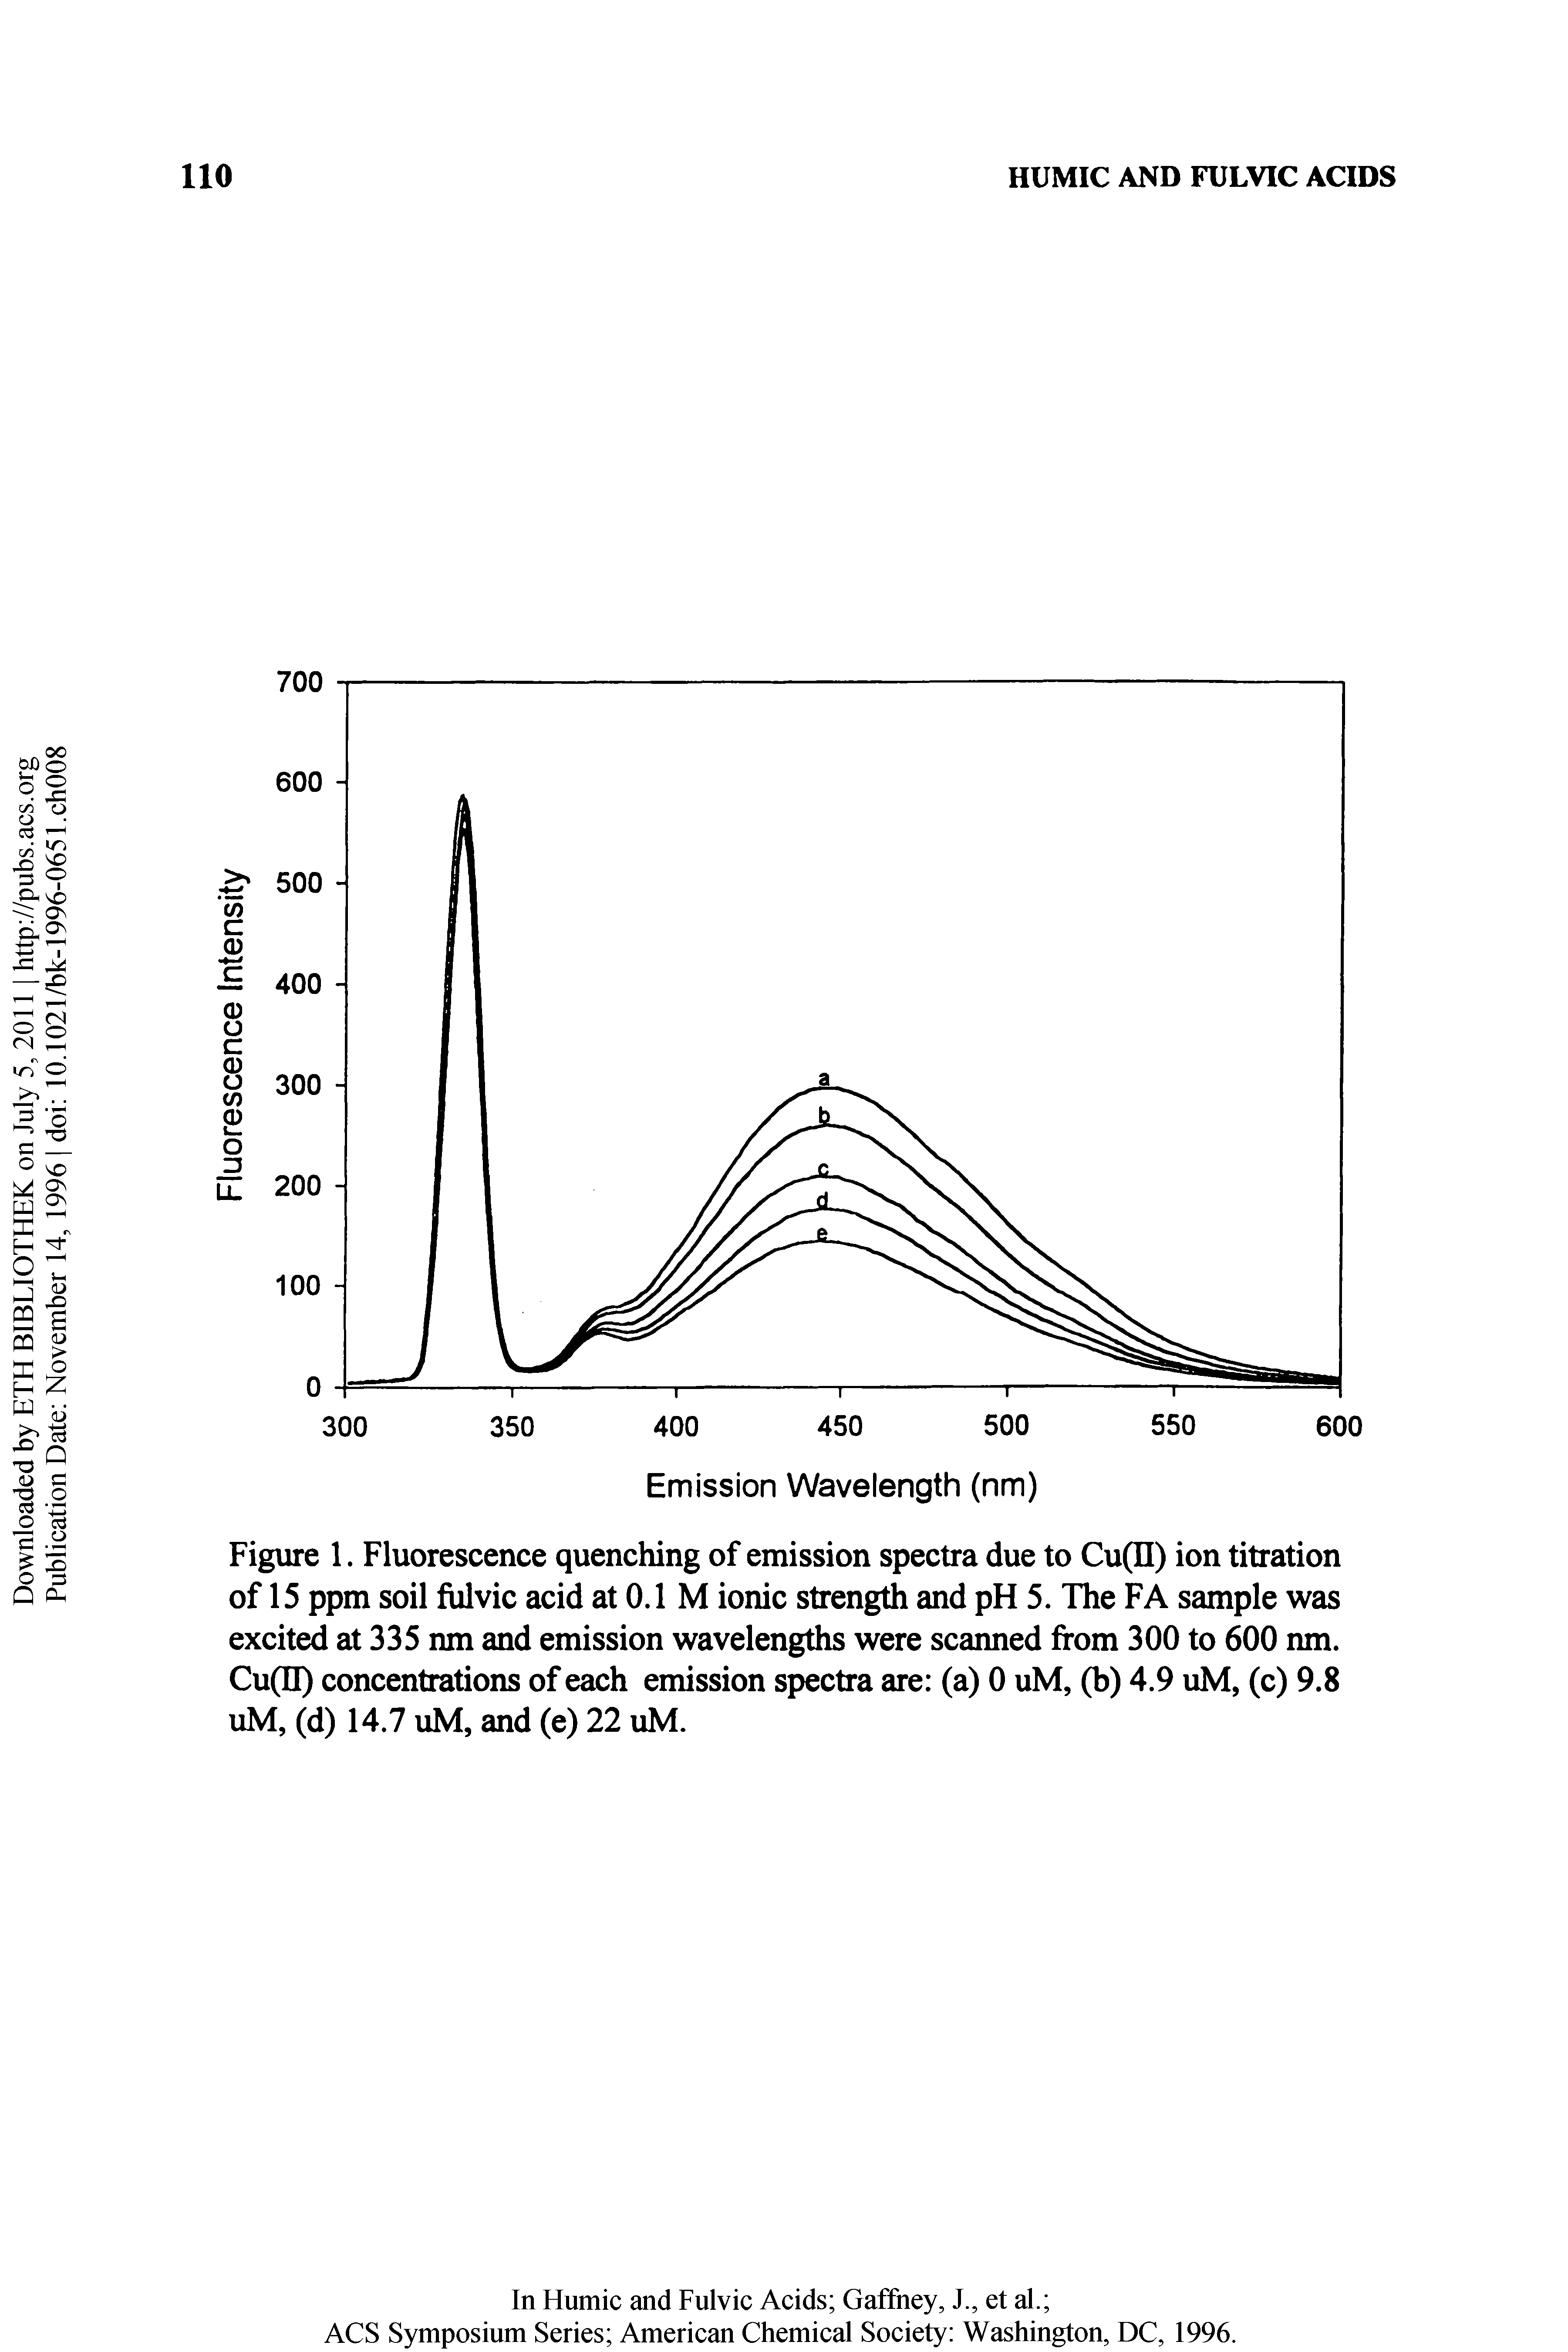 Figure 1. Fluorescence quenching of emission spectra due to Cu(II) ion titration of 15 ppm soil fulvic acid at 0.1 M ionic strength and pH 5. The FA sample was excited at 335 nm and emission wavelengths were scanned from 300 to 600 nm. Cu(n) concentrations of each emission spectra are (a) 0 uM, (b) 4.9 uM, (c) 9.8 uM, (d) 14.7 uM, and (e) 22 uM.